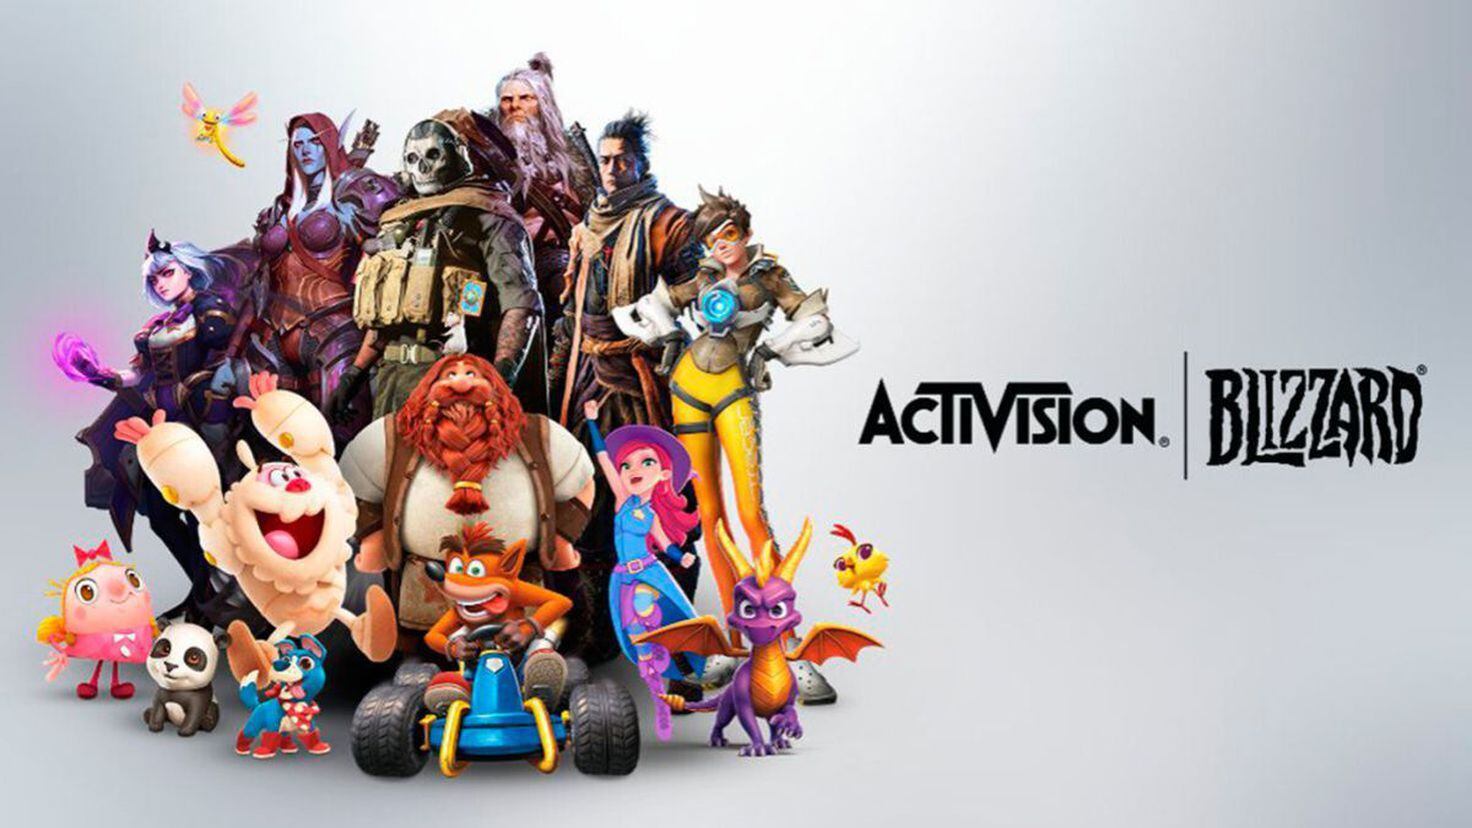 Activision Blizzard had a plan — or ploy — to launch its own